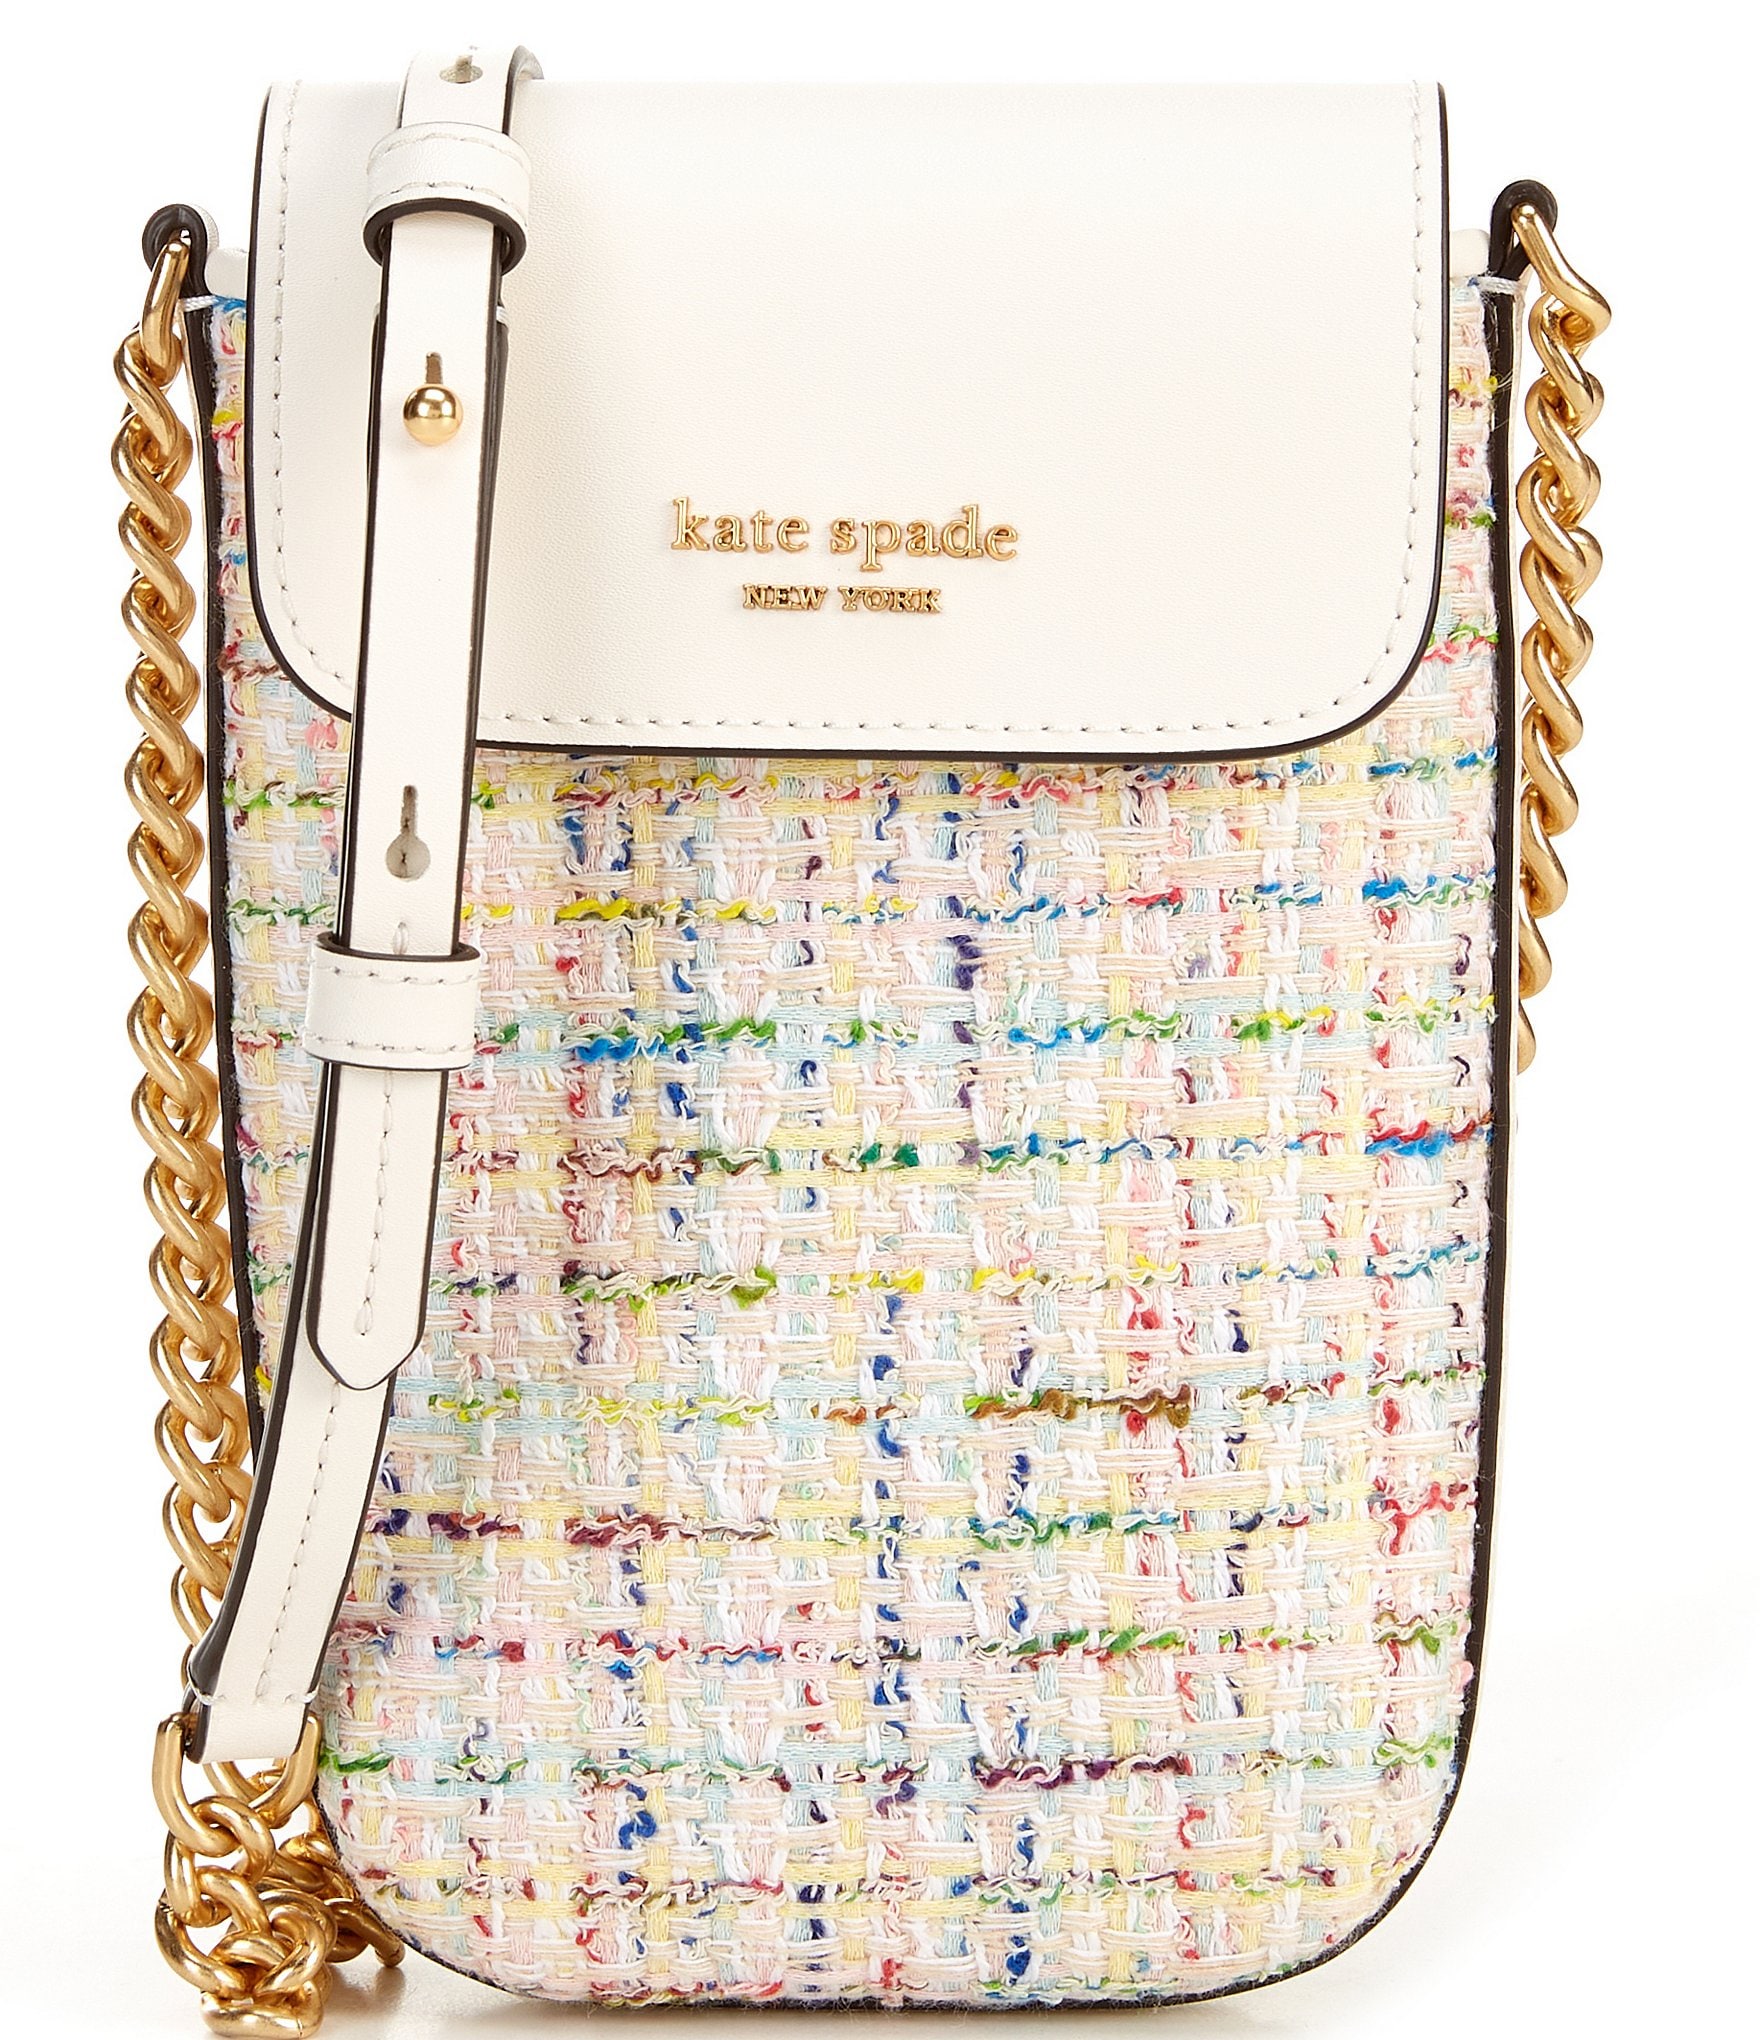 Steffie Embellished Straw North South Phone Crossbody